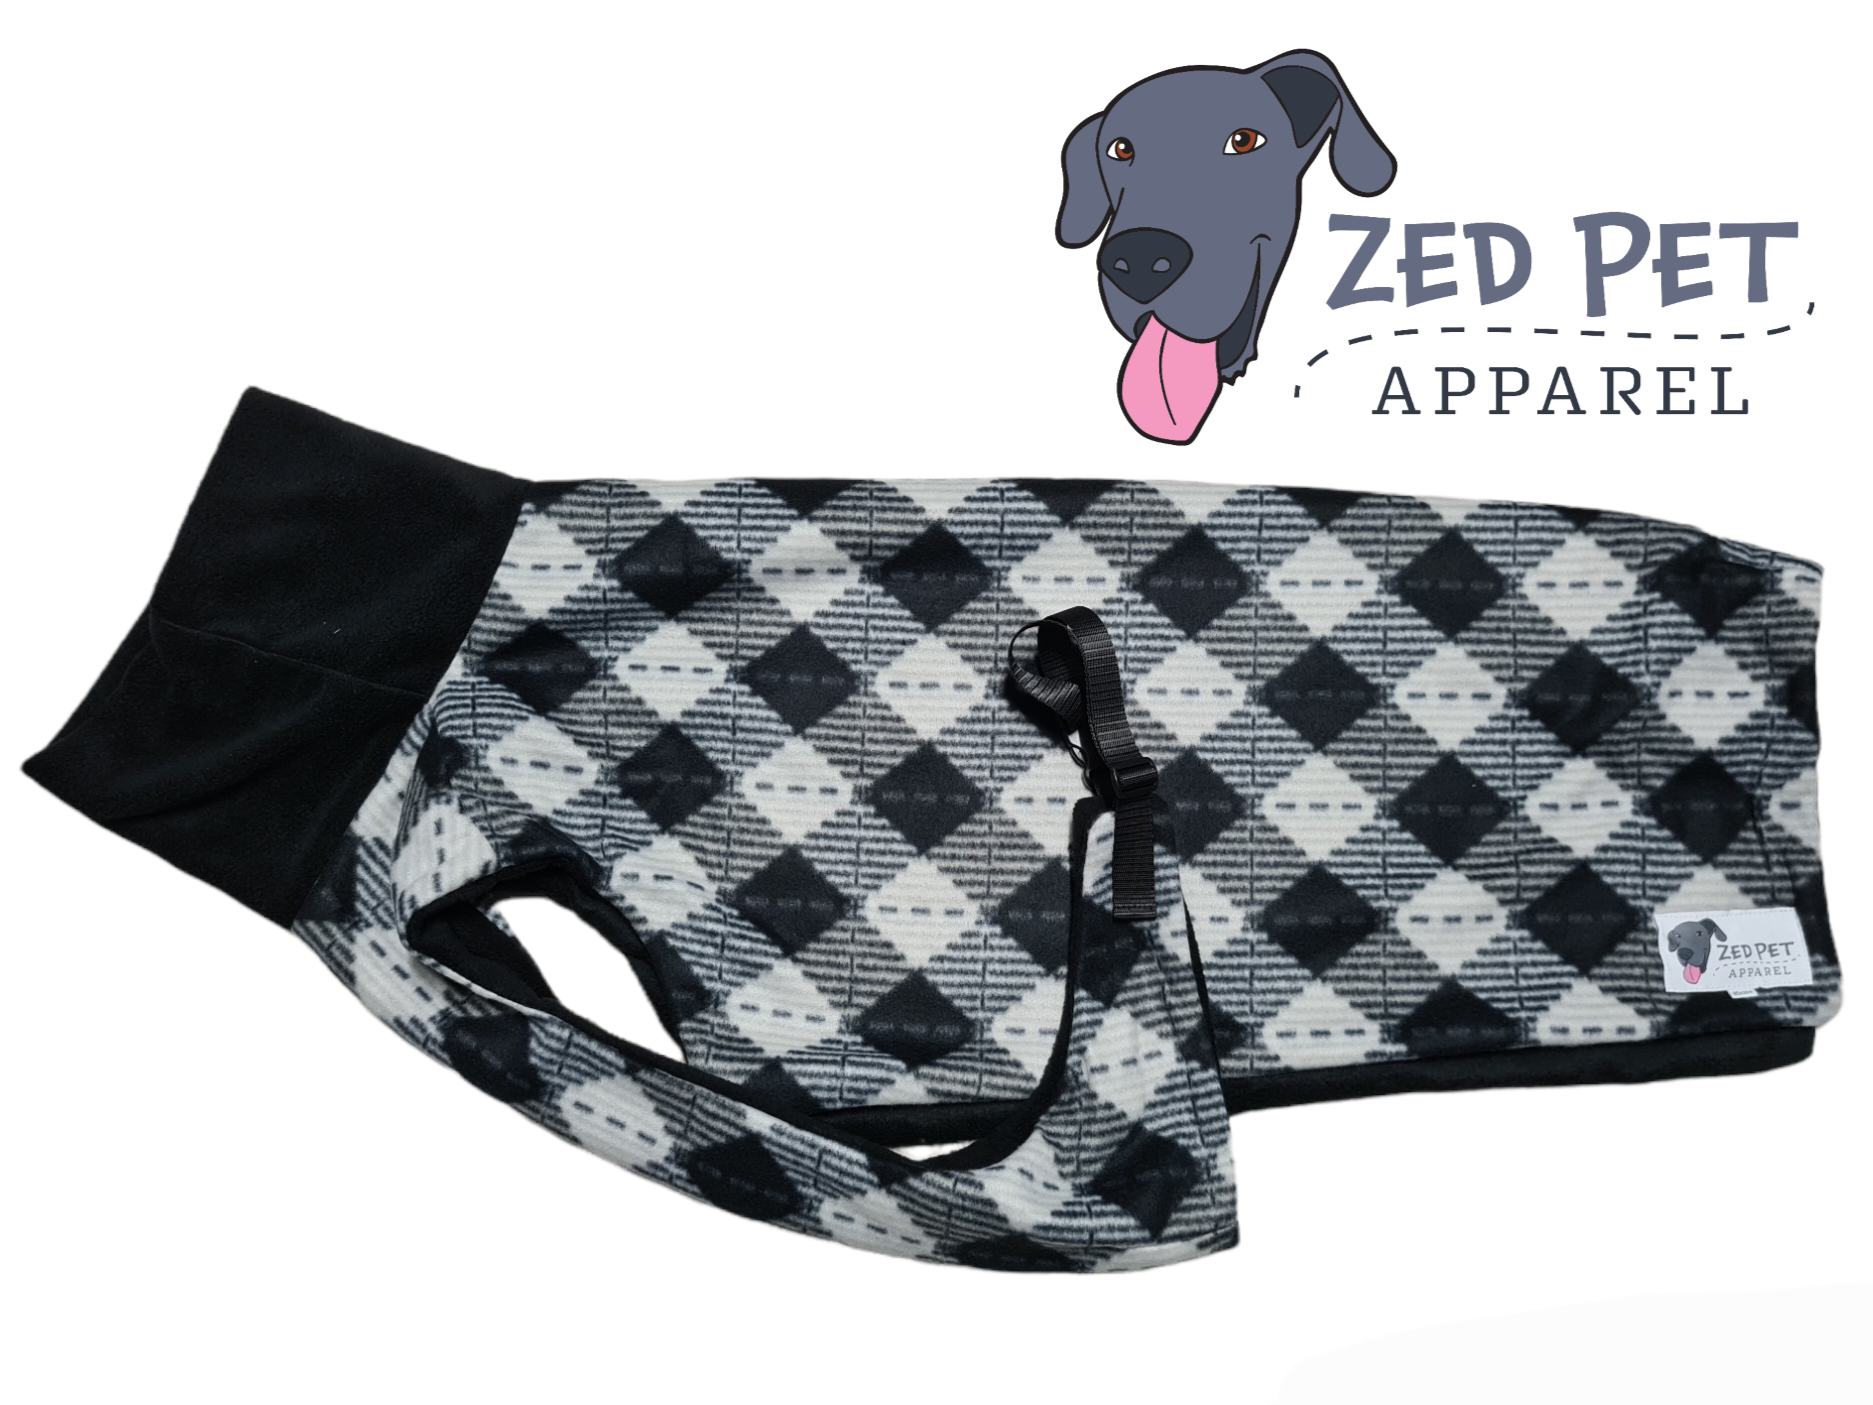 Black and grey diagonal check great dane dog coat with black turtle neck